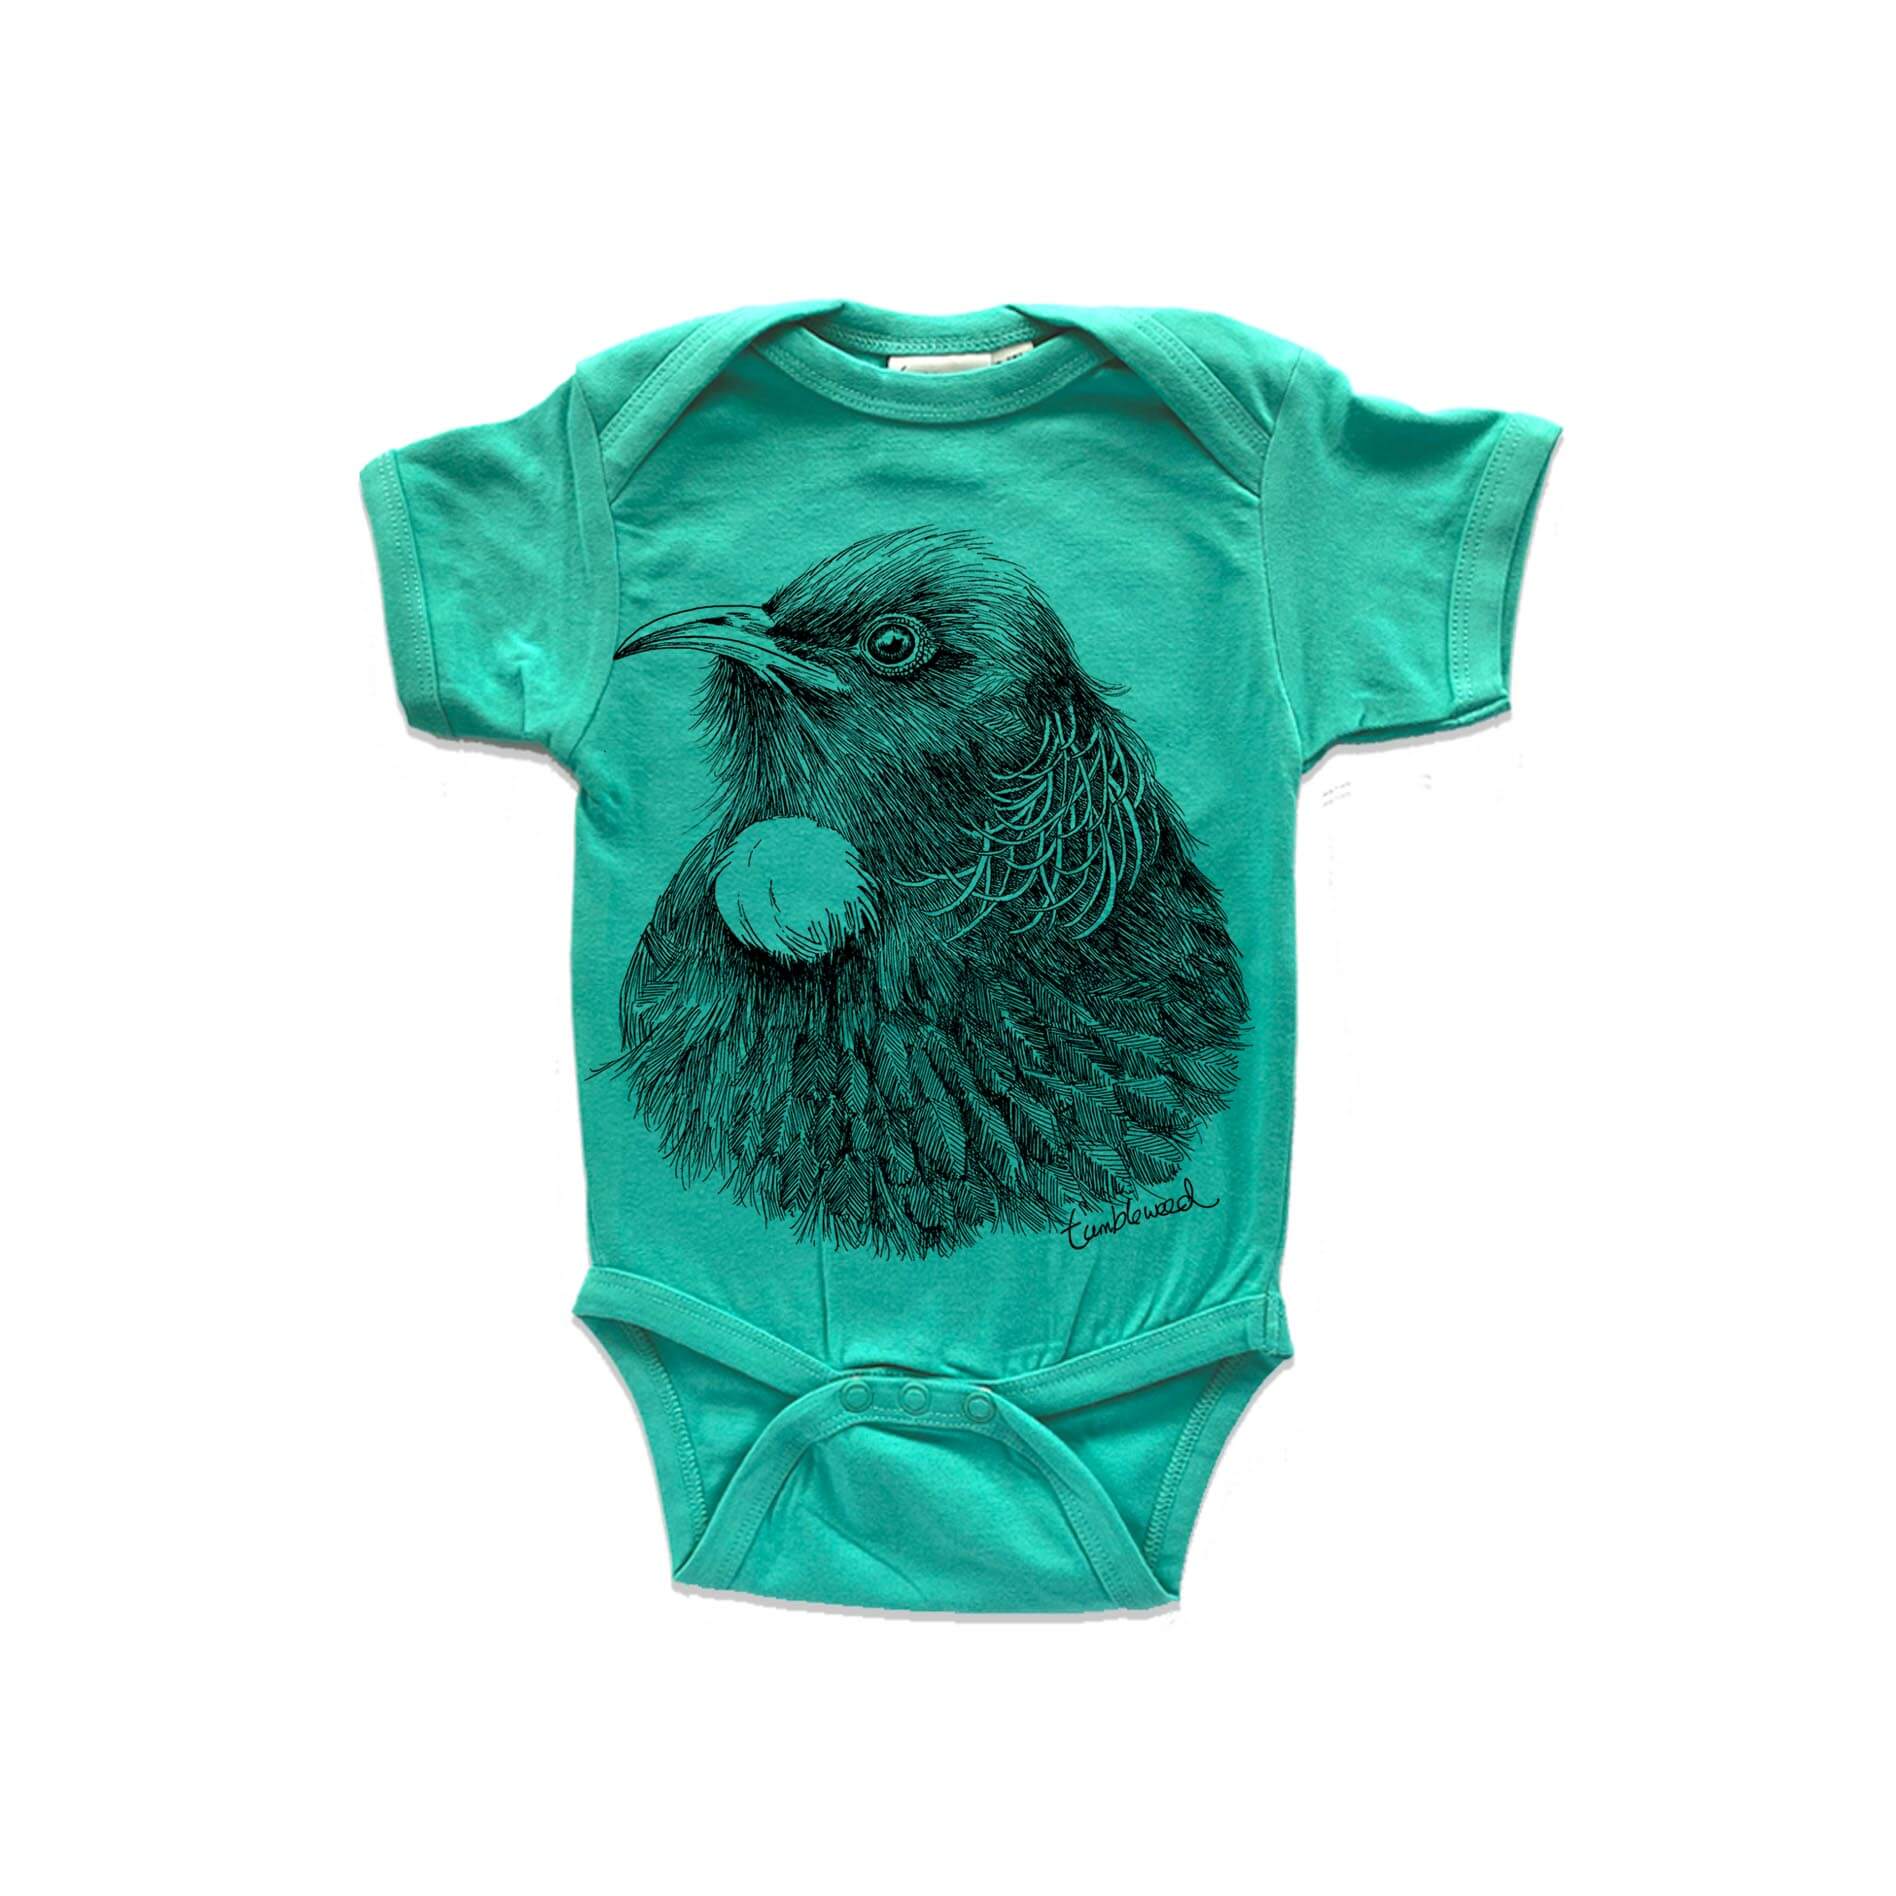 Short sleeved, marine, organic cotton, baby onesie featuring a screen printed Tui design.